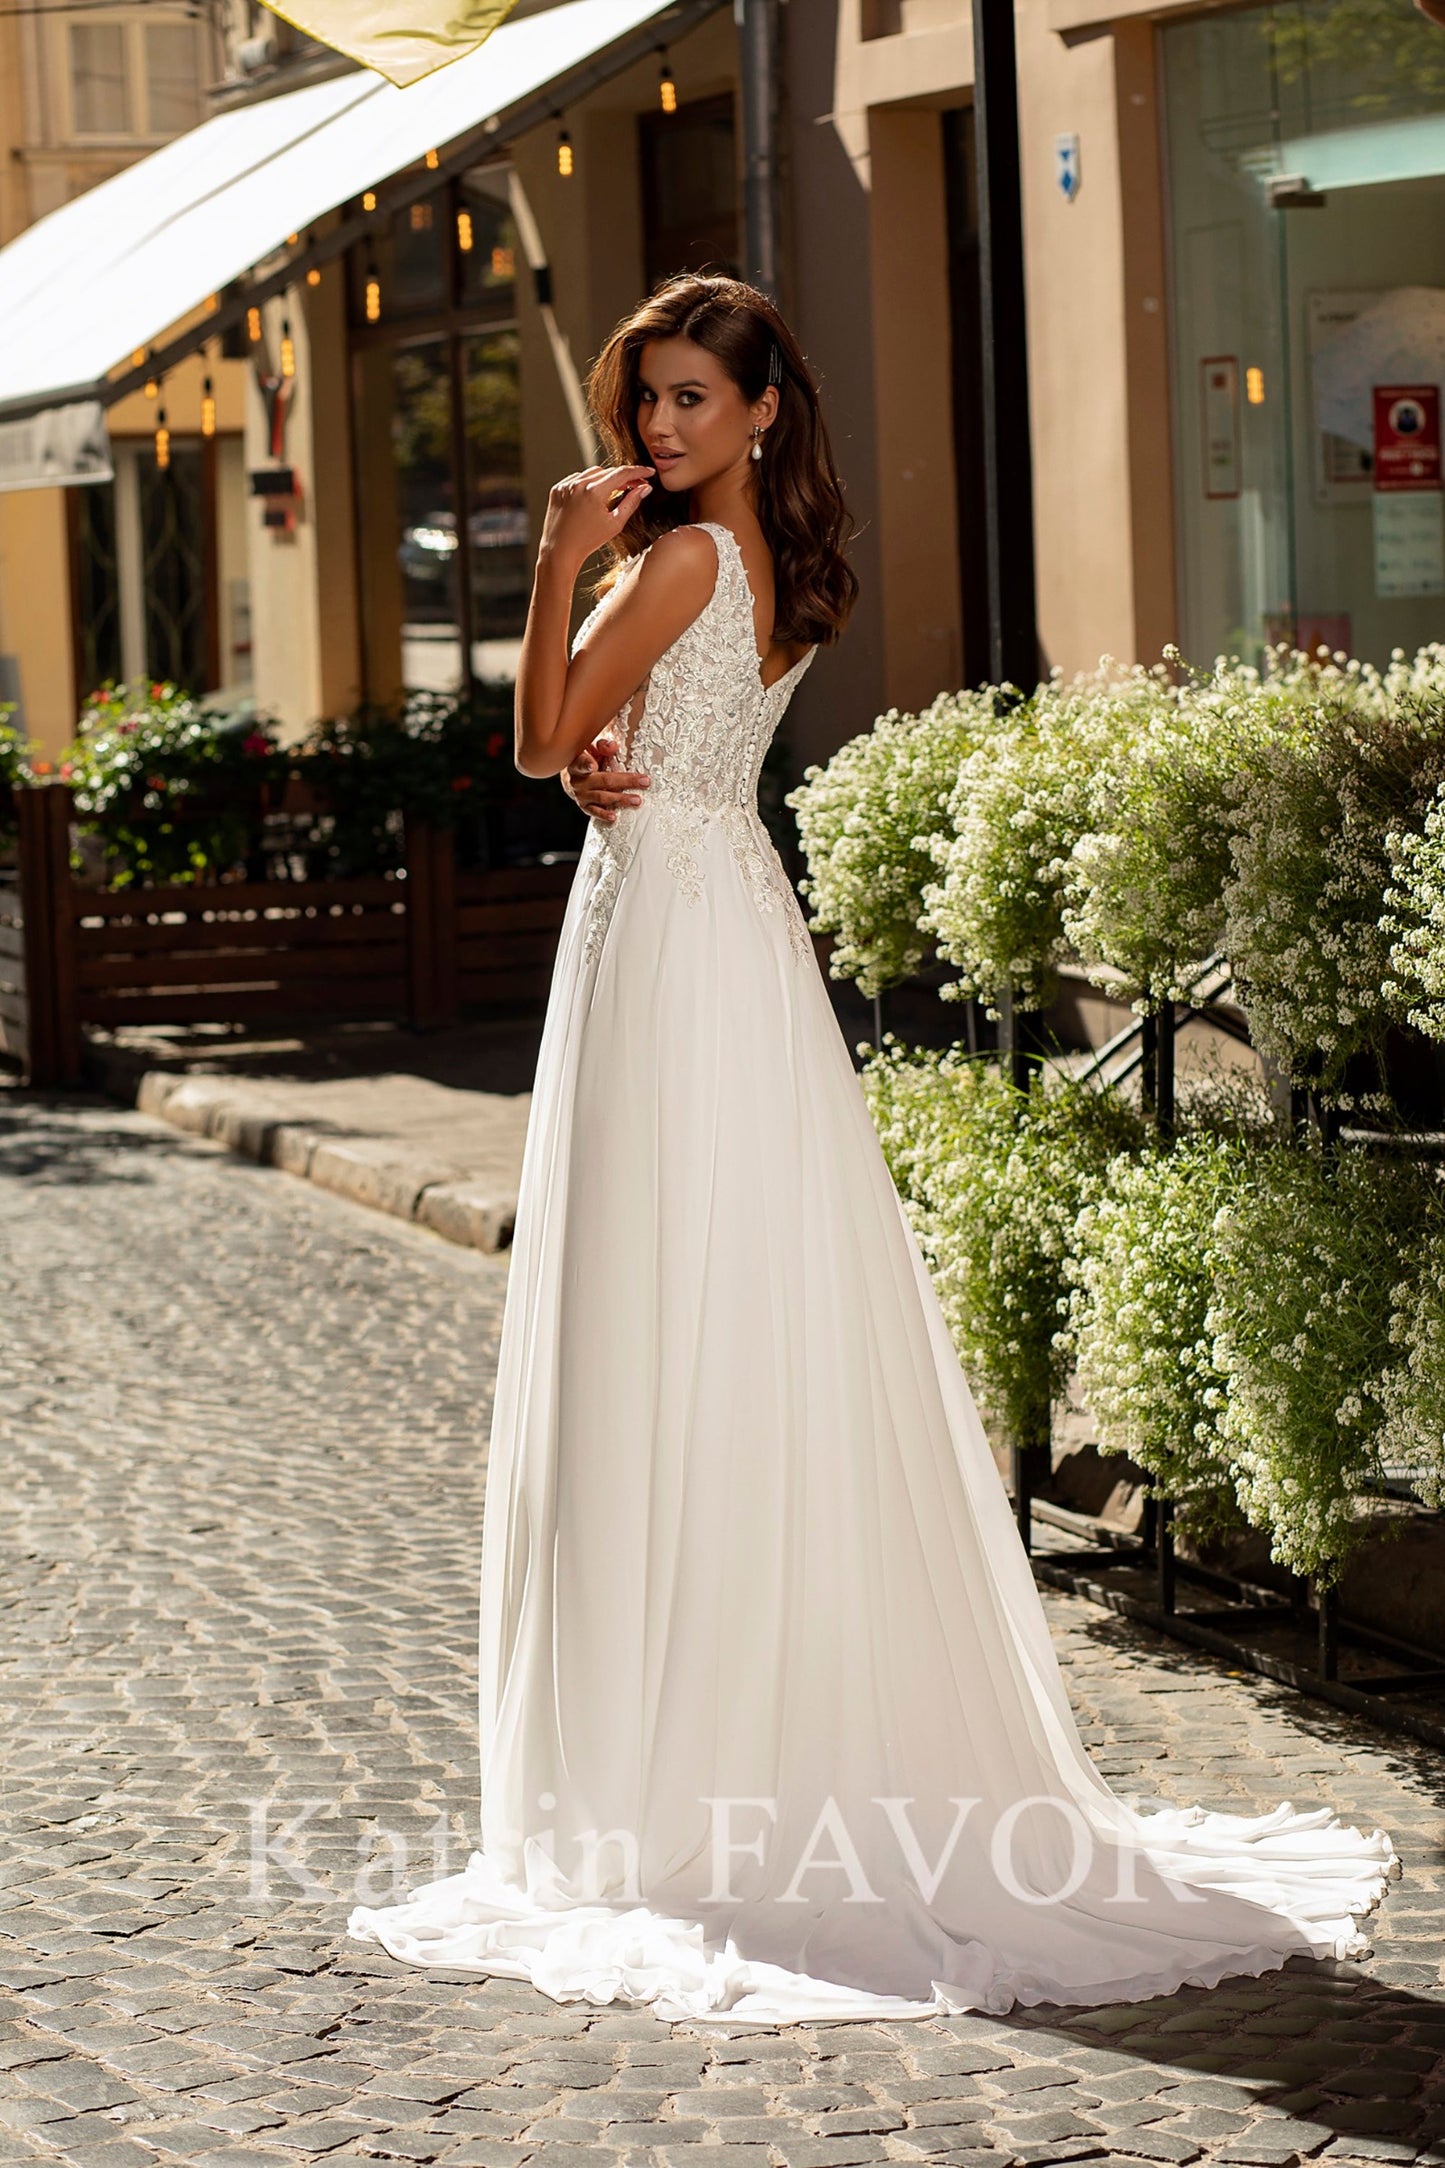 KatrinFAVORboutique-Chiffon a-line embroidered wedding dress